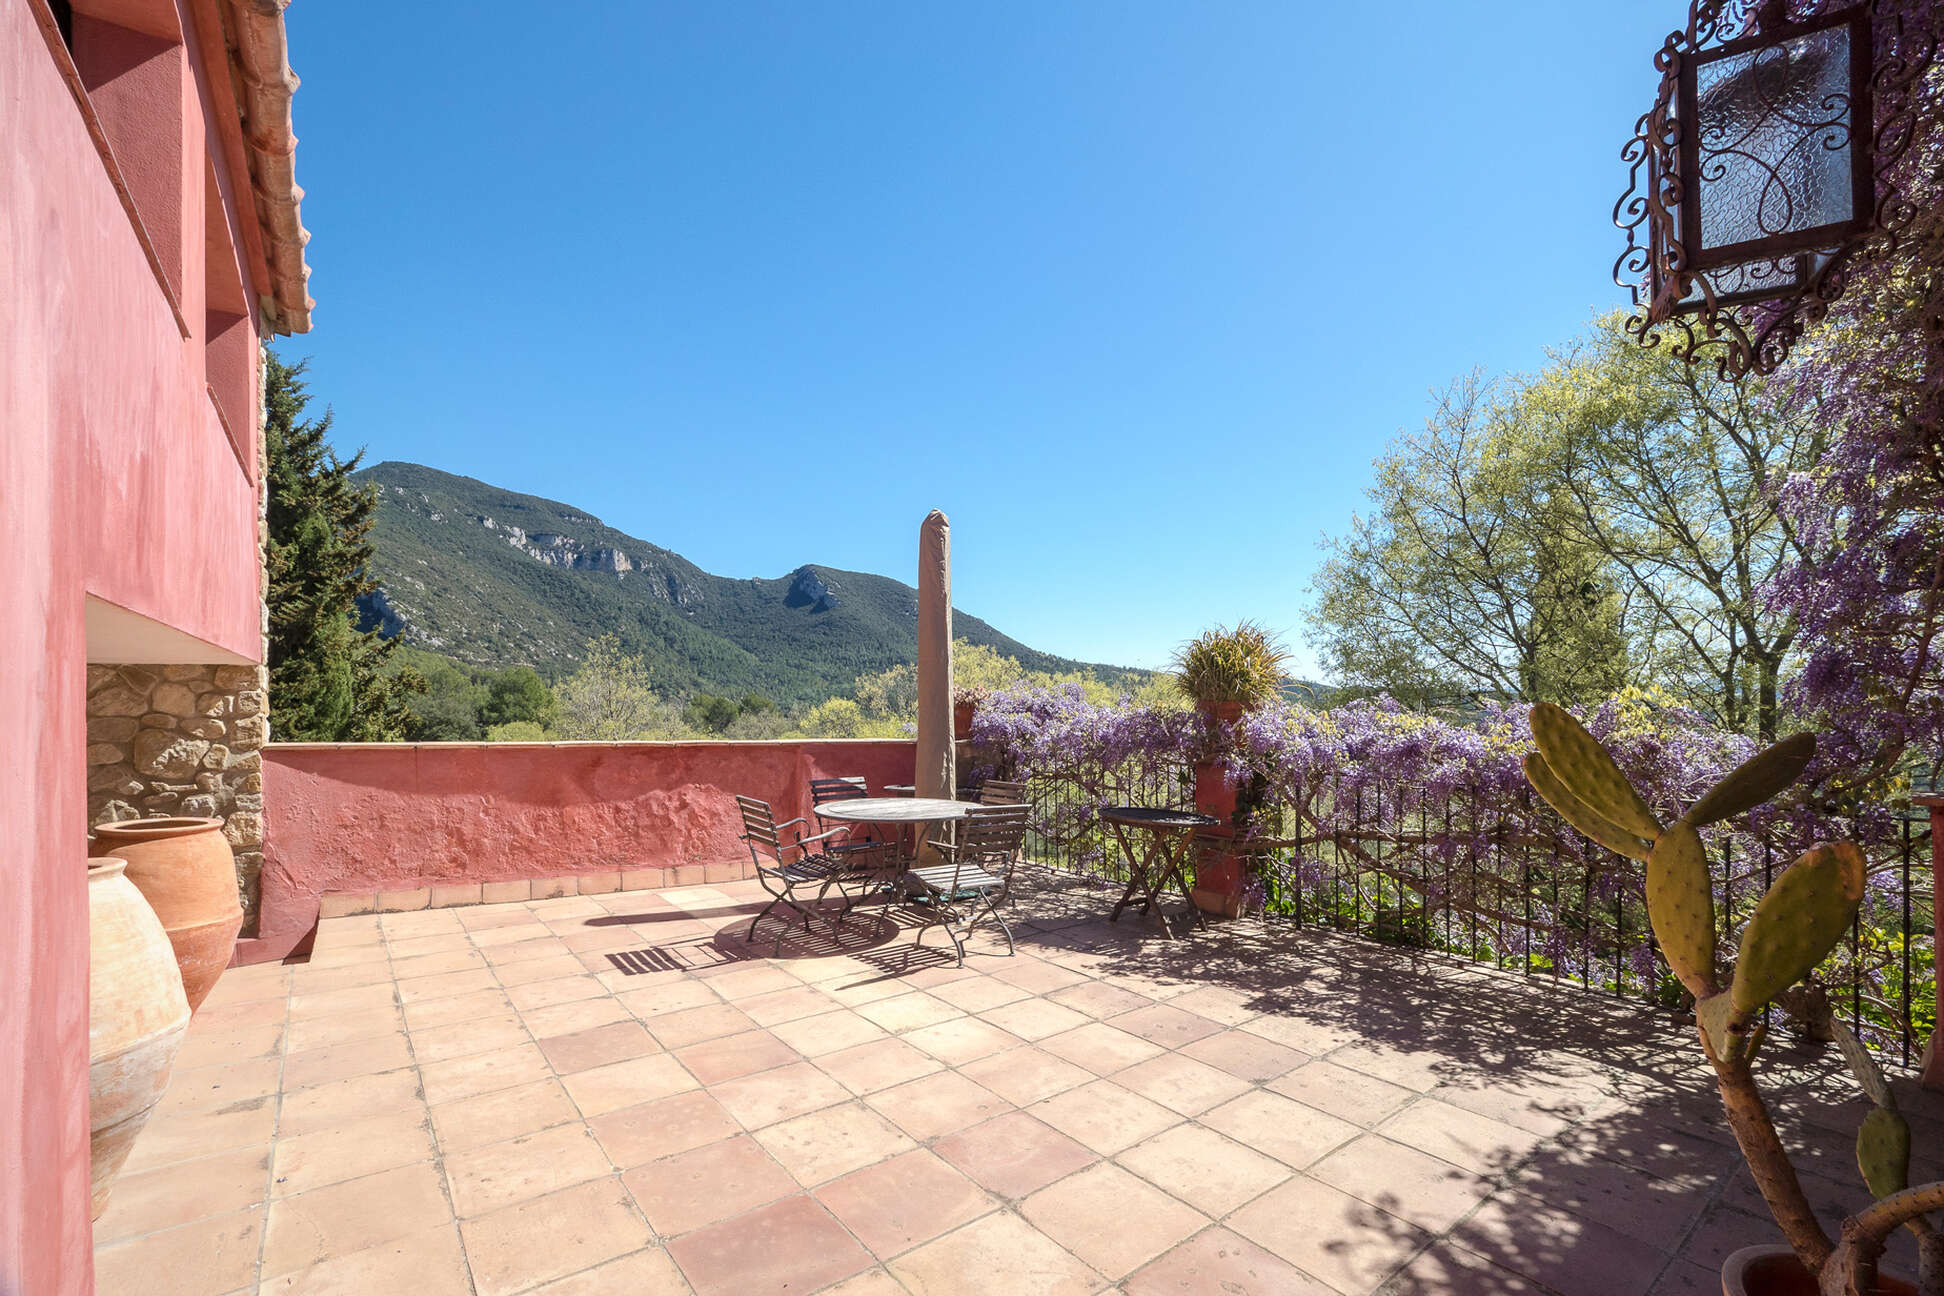 Fantastic rural farmhouse or luxury hotel for sale in flat nature.